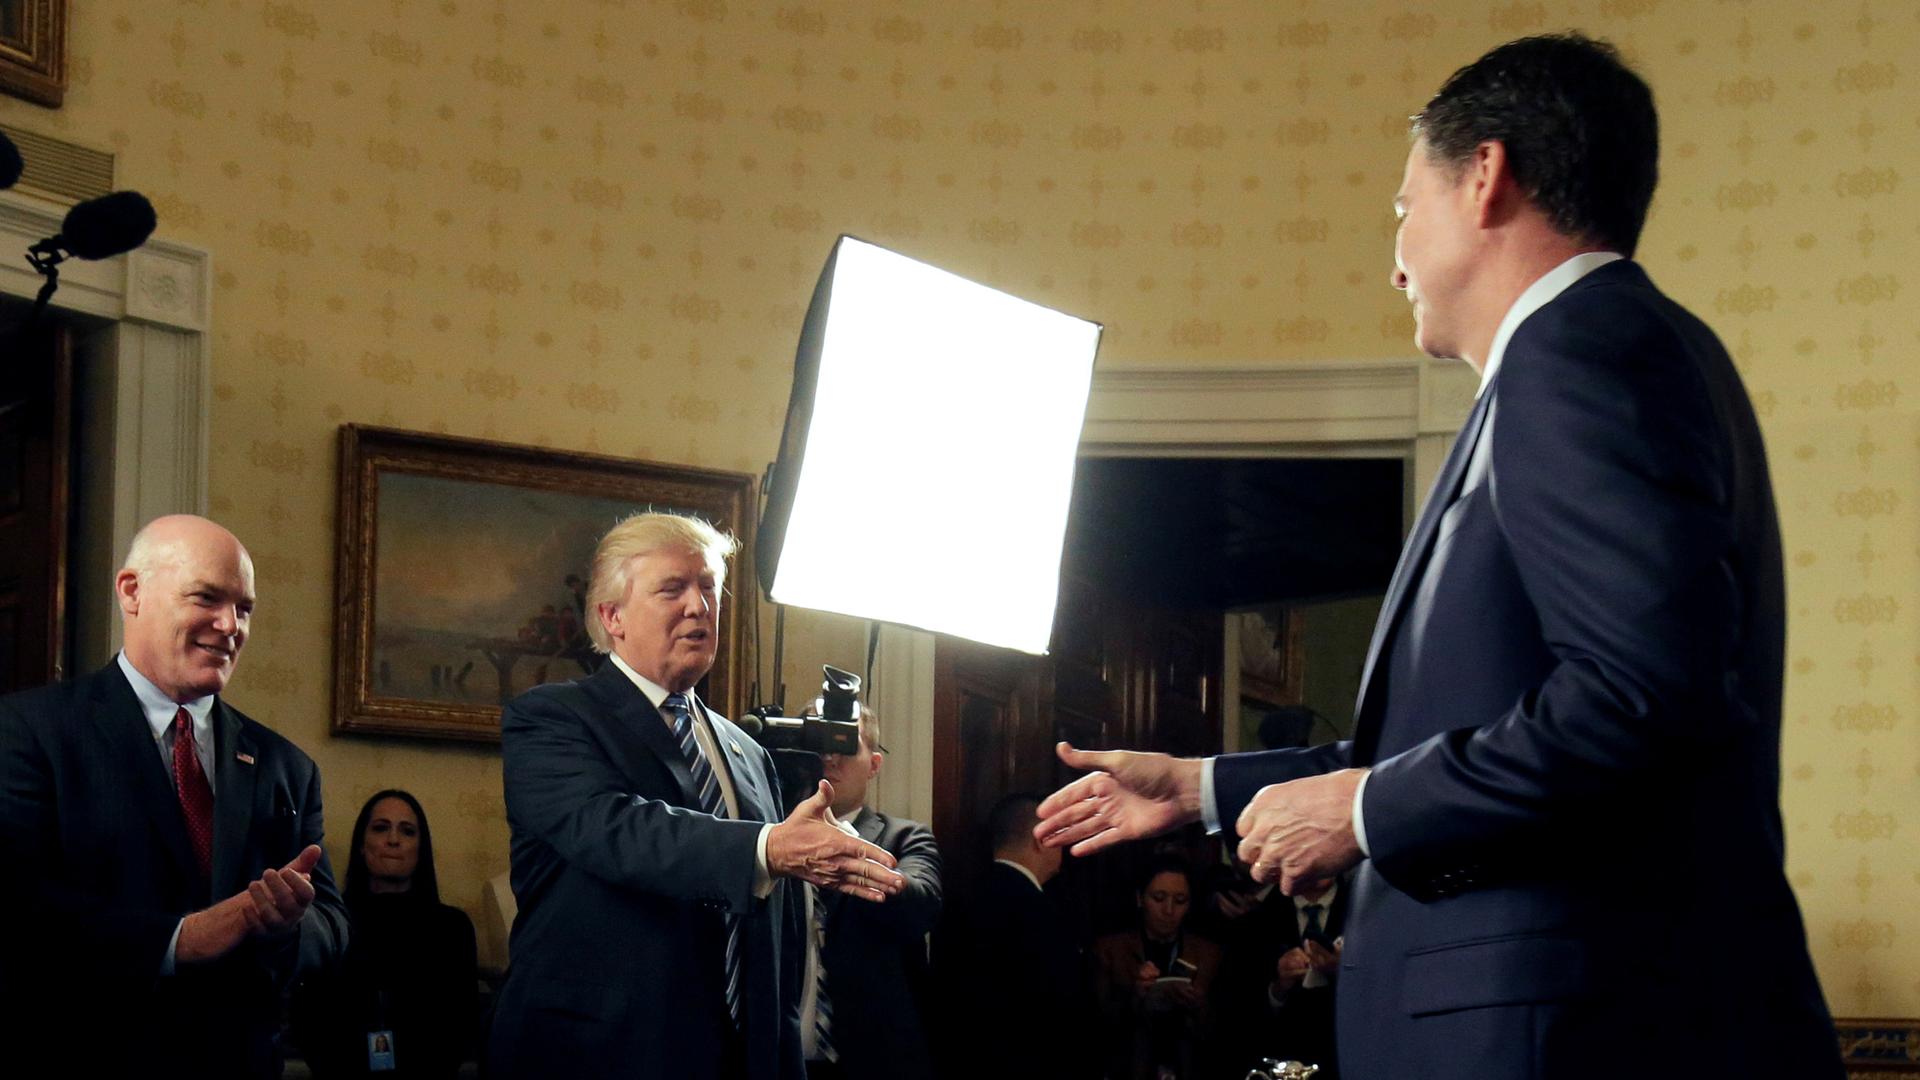 President Donald Trump greets Director of the FBI James Comey as Director of the Secret Service Joseph Clancy (L), watches at the White House.